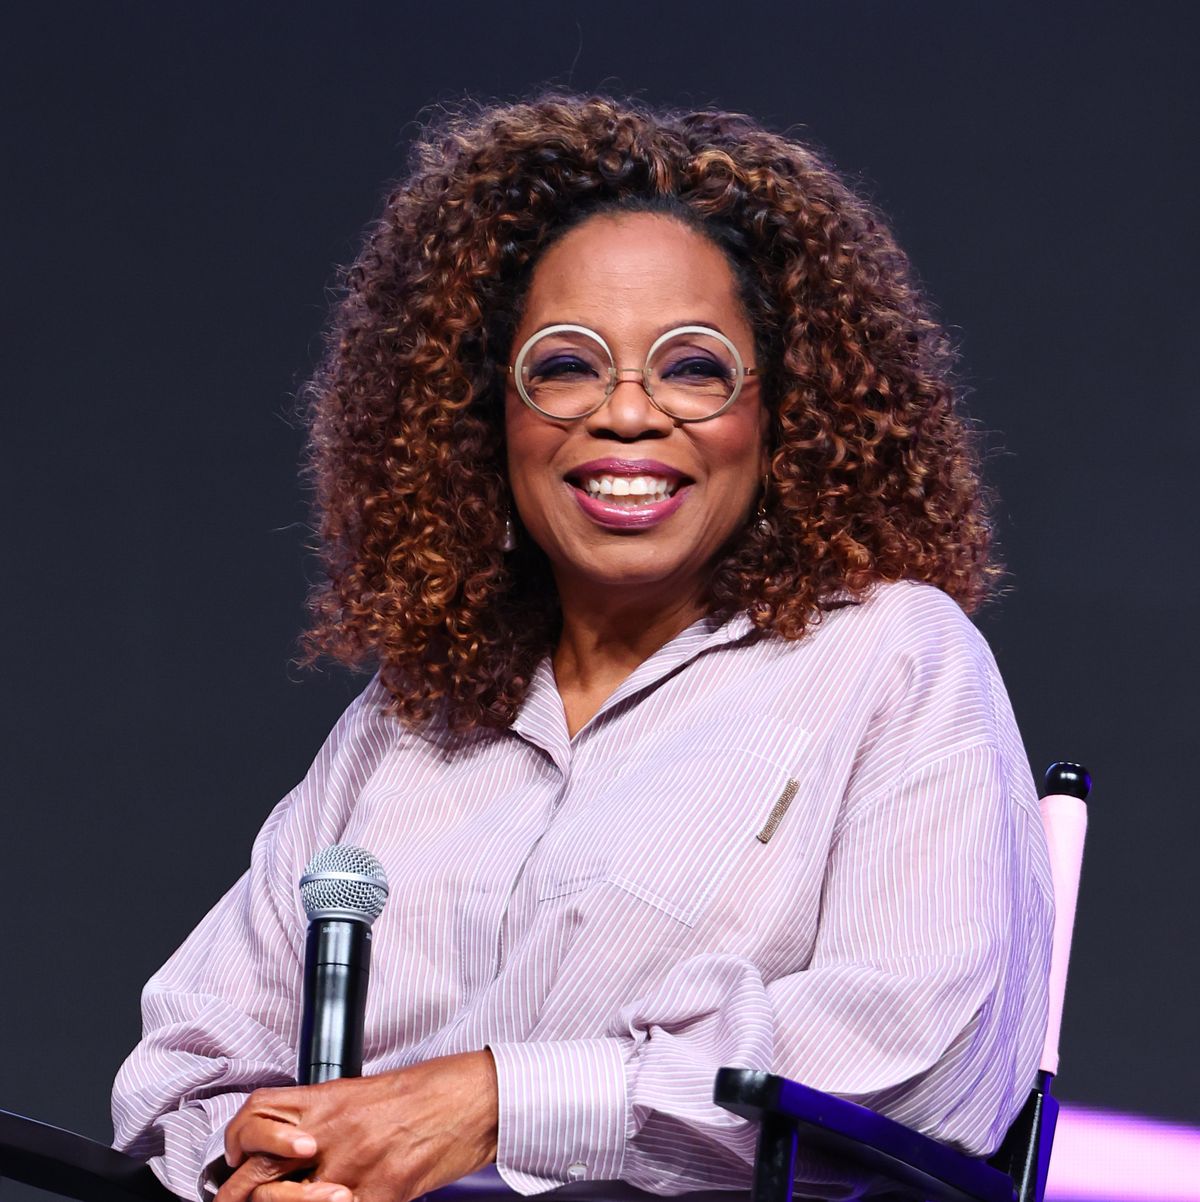 https://hips.hearstapps.com/hmg-prod/images/oprah-winfrey-speaks-onstage-during-from-the-page-to-the-news-photo-1694093885.jpg?crop=1.00xw:0.668xh;0,0&resize=1200:*